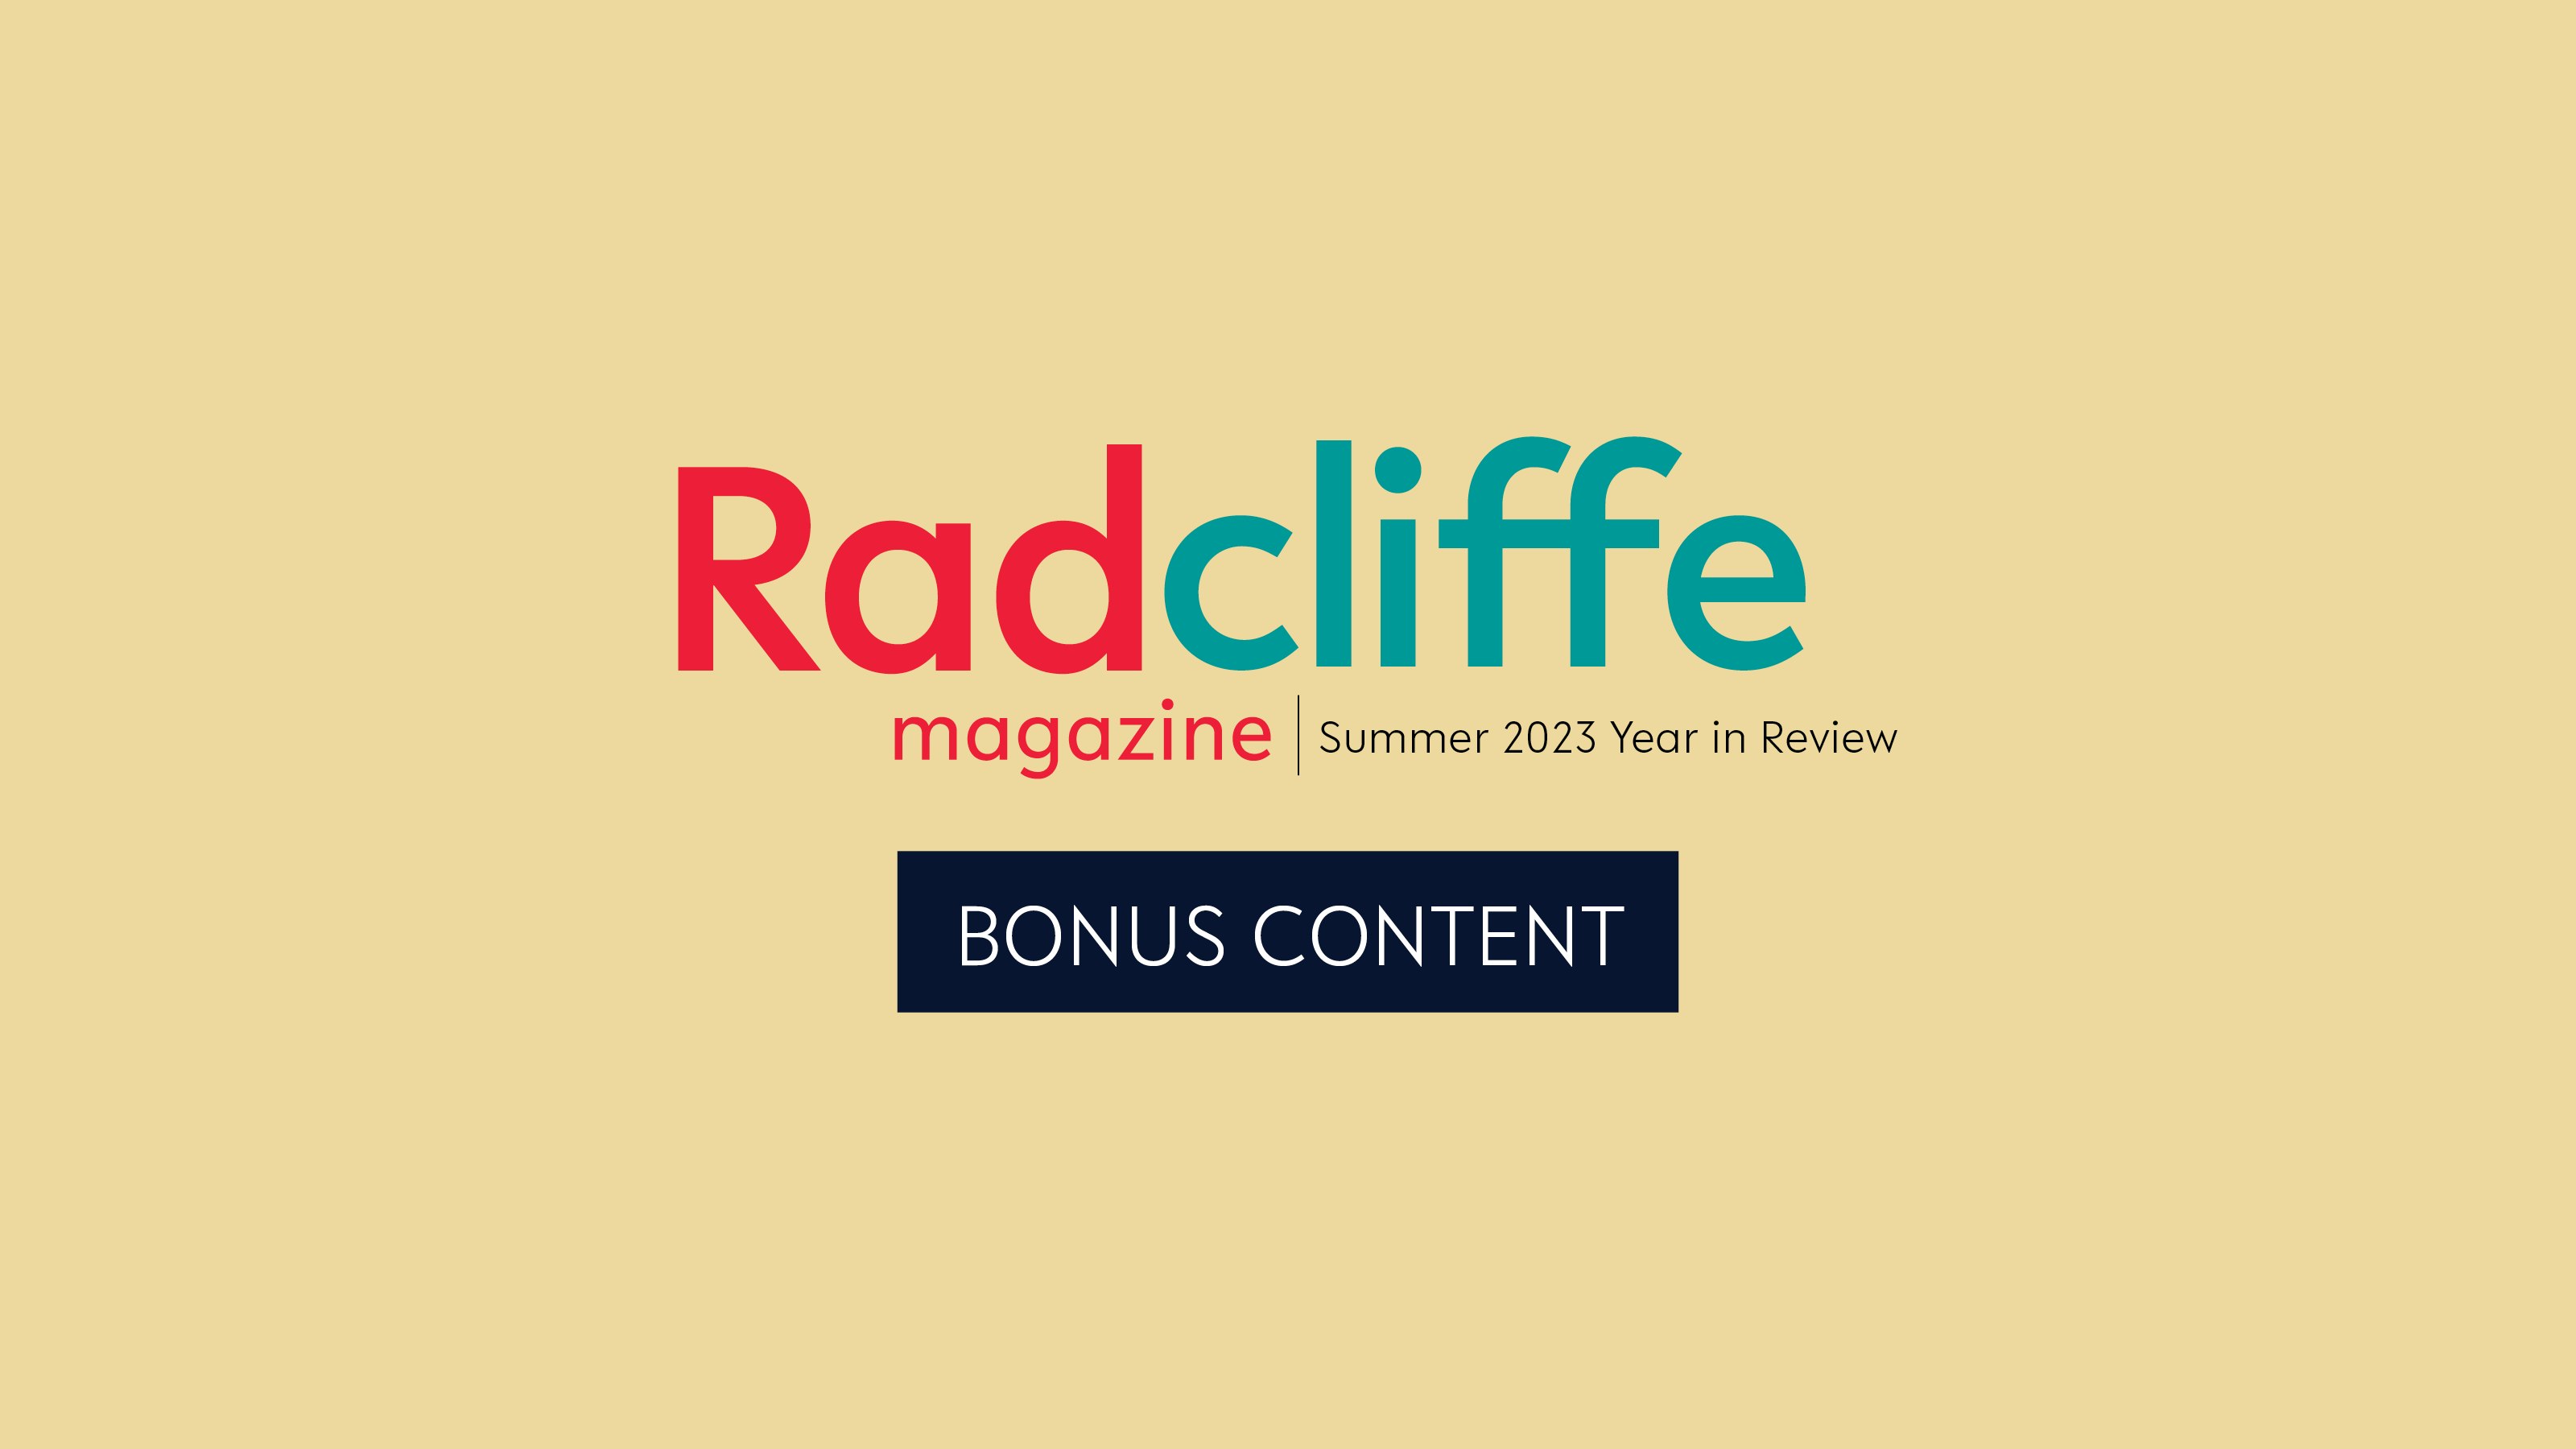 Click here to experience bonus multimedia content from the 2023 Year in Review issue of Radcliffe Magazine